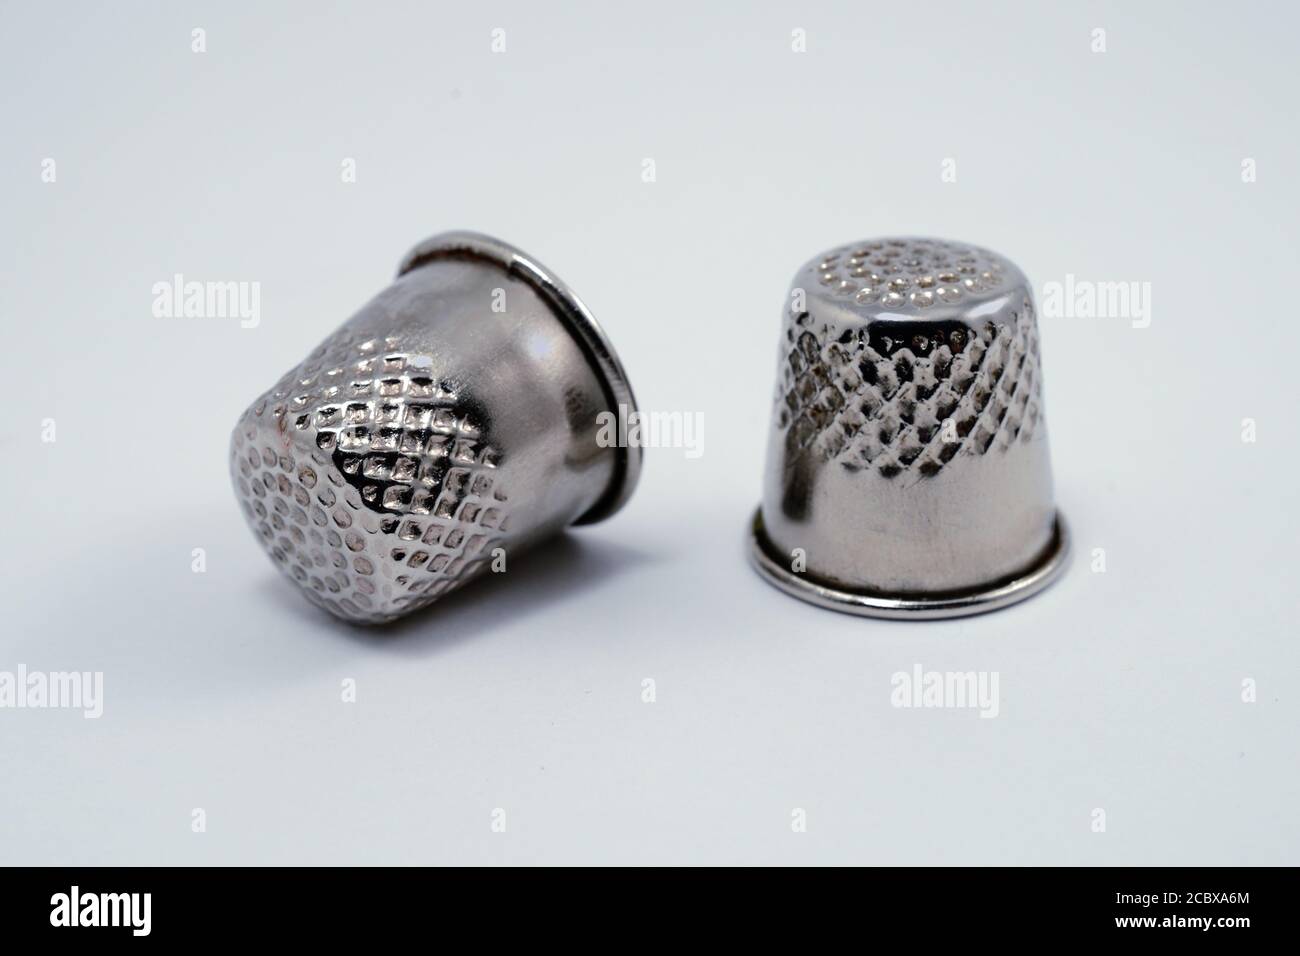 two old metal tailor thimbles on a white background Stock Photo